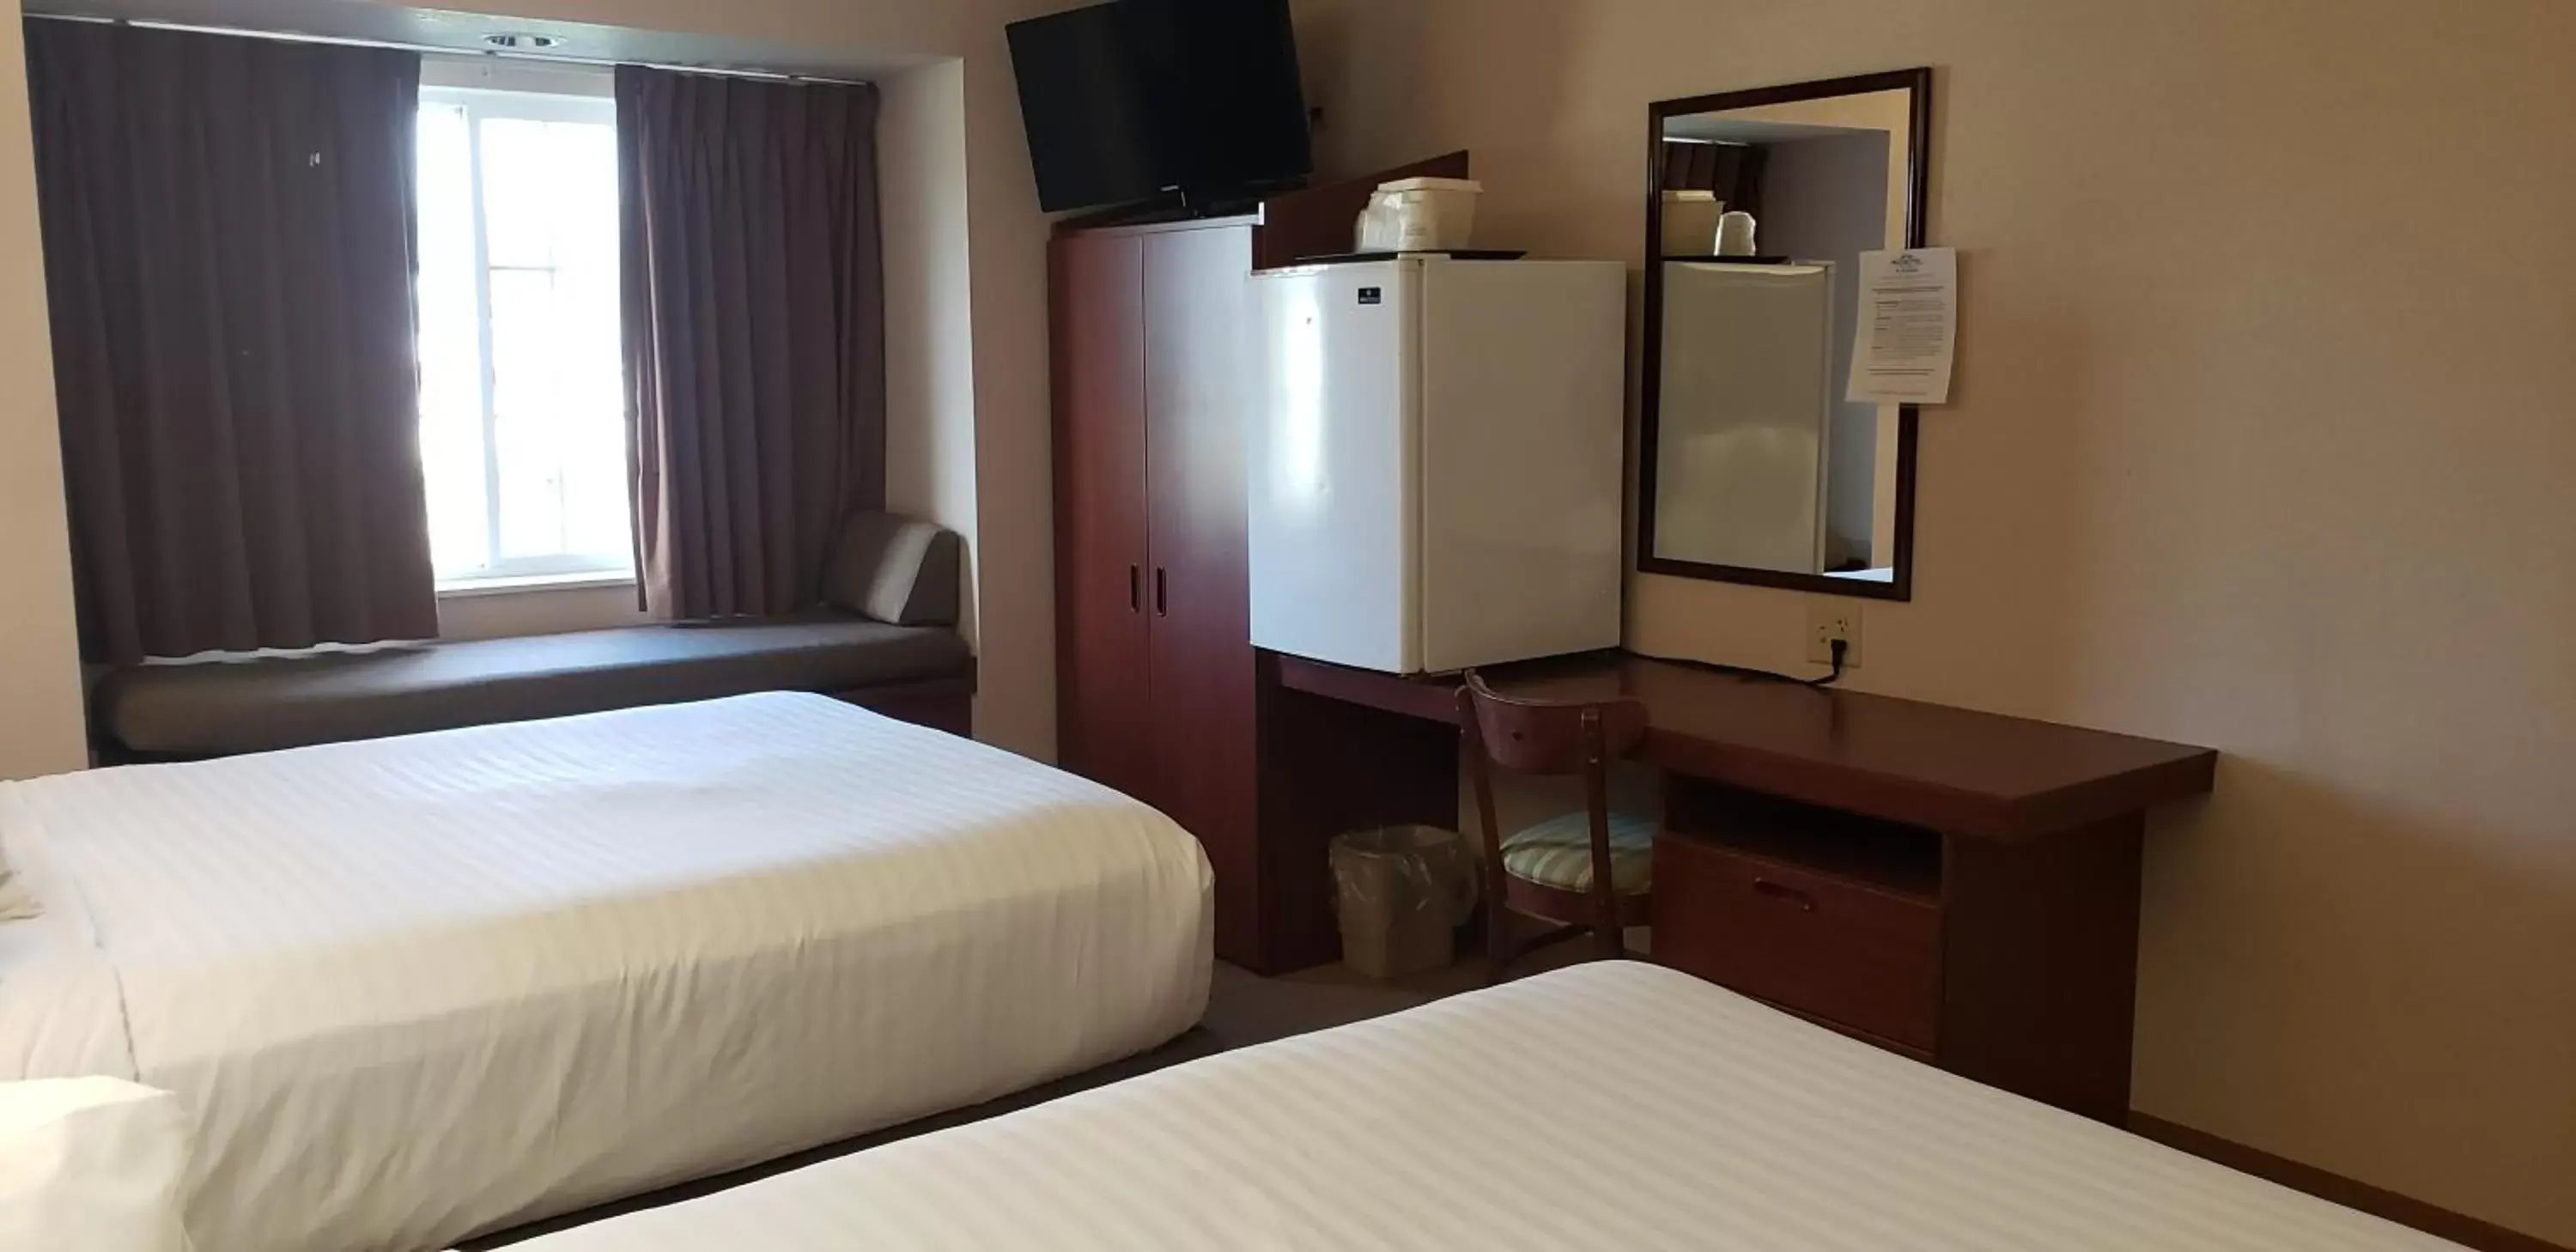 Bed in Microtel Inn & Suites by Wyndham Wellsville